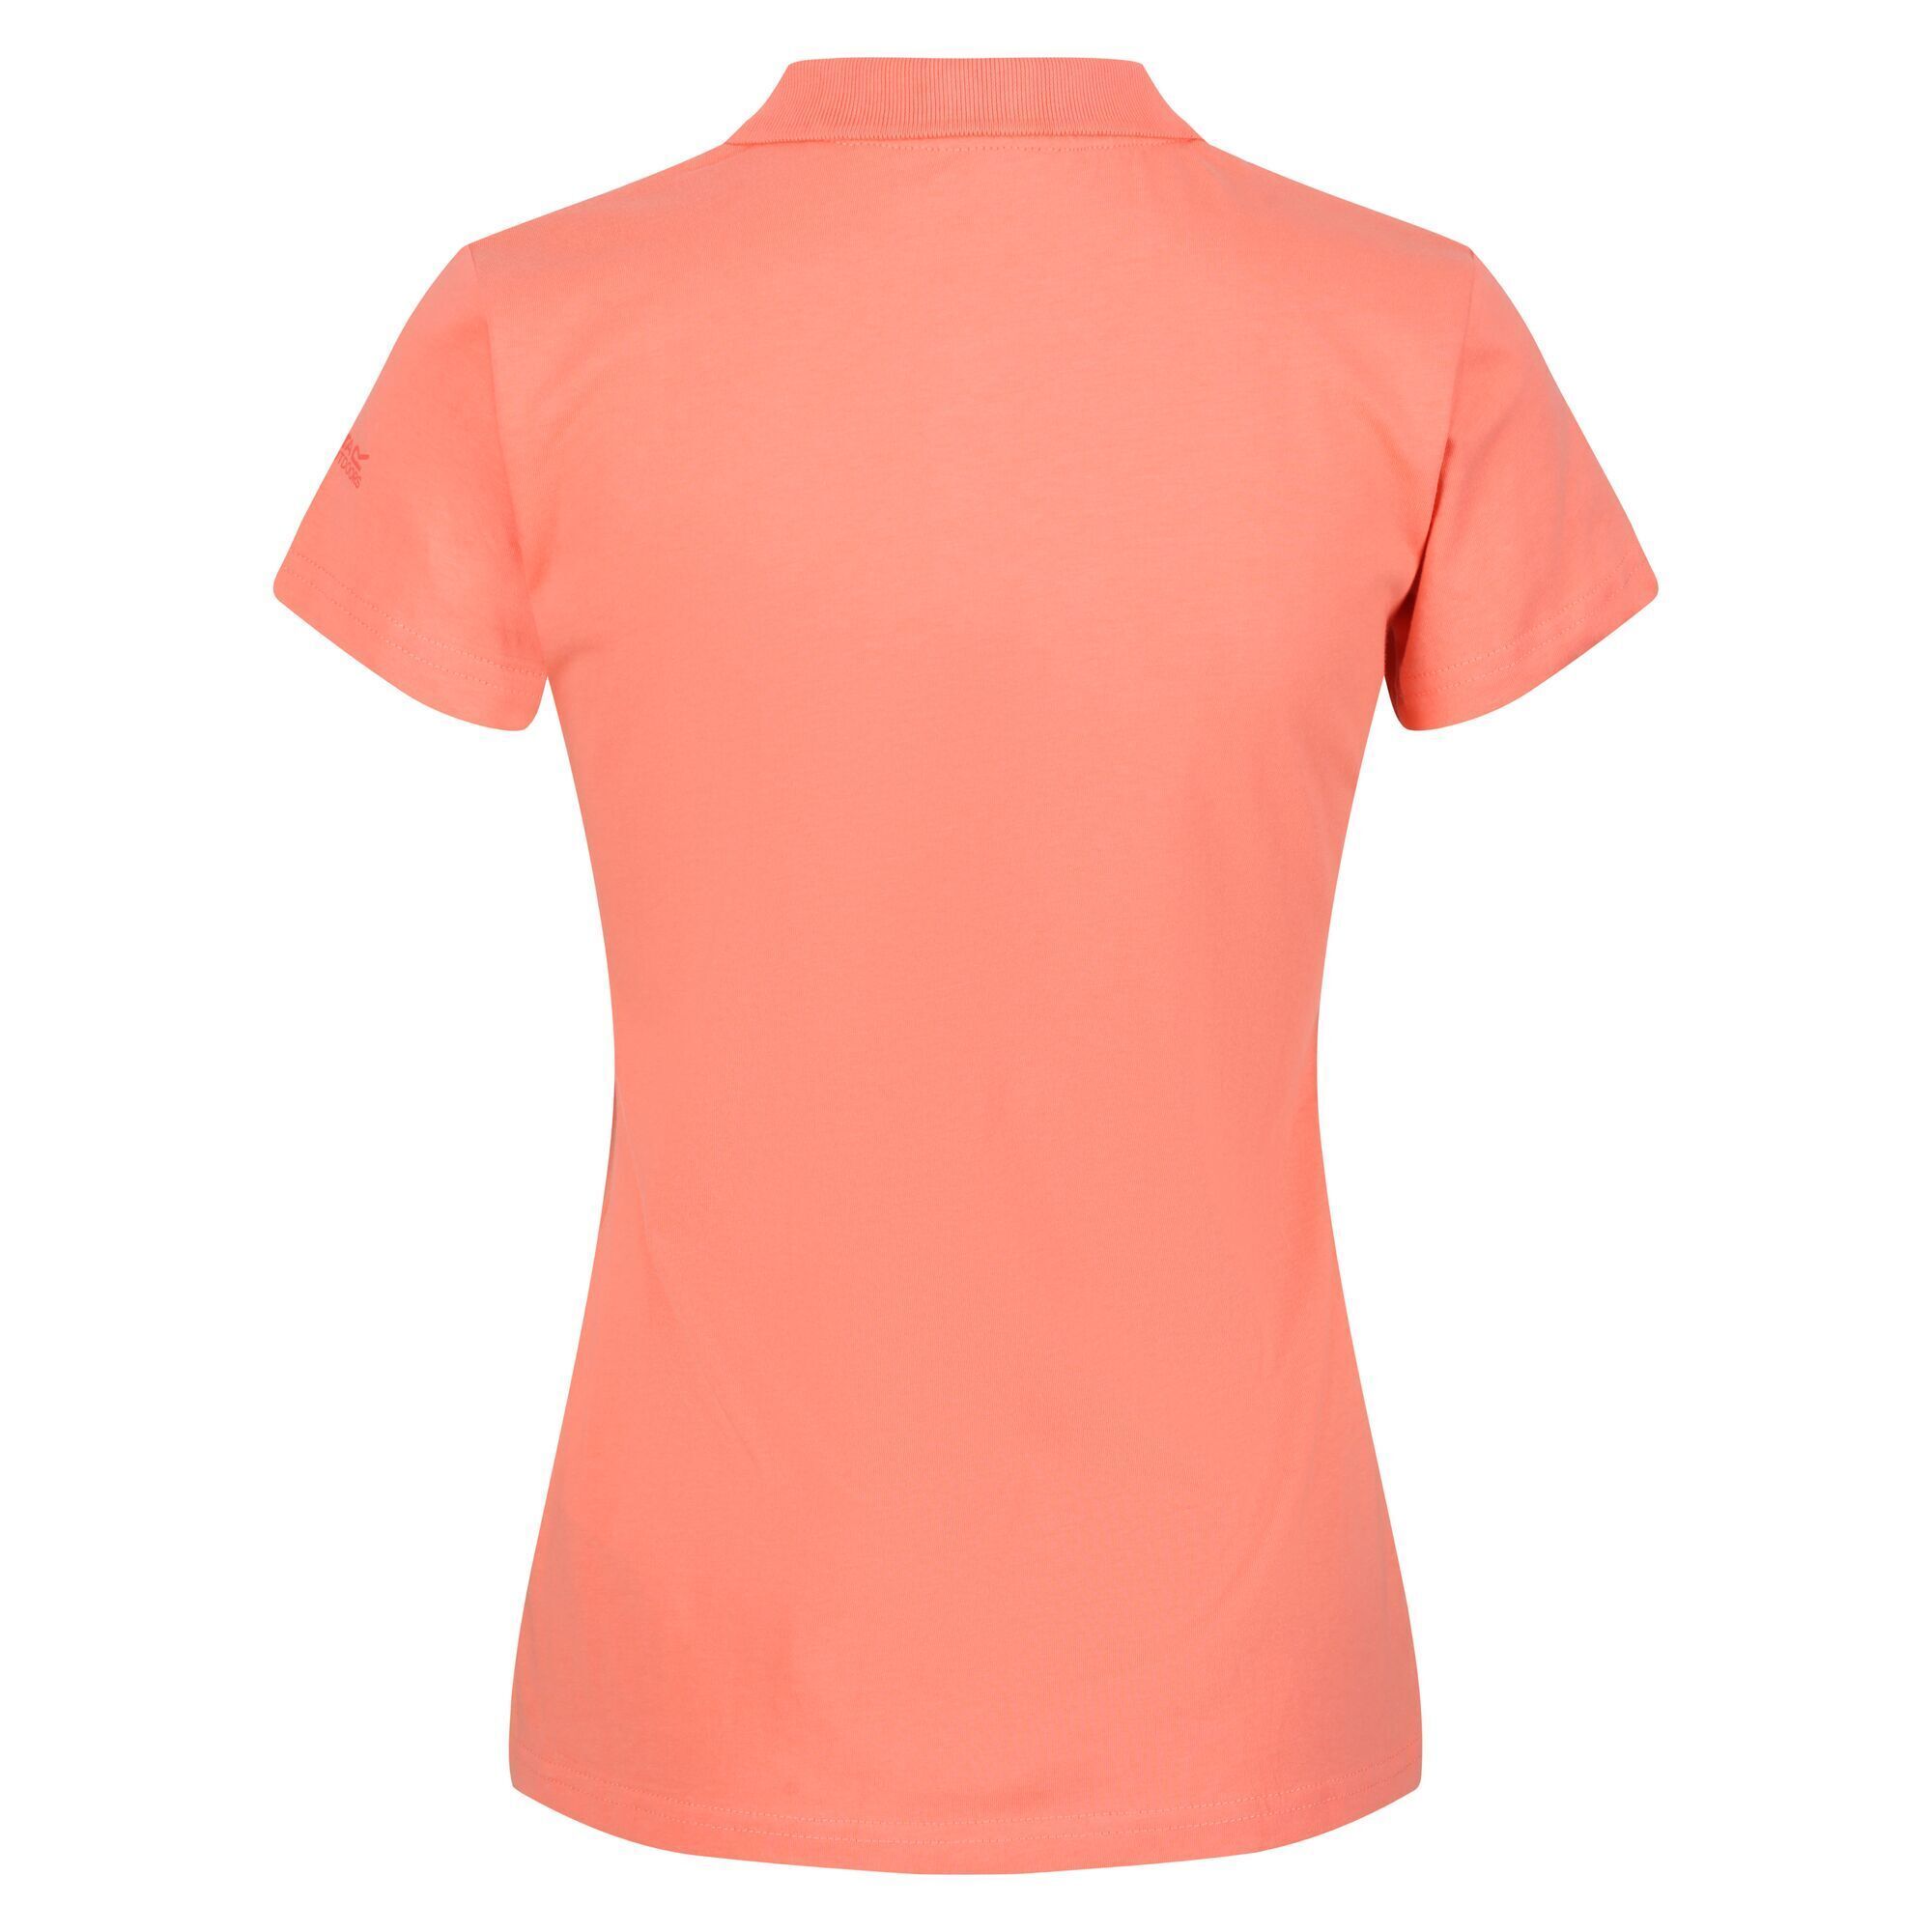 100% Cotton. Fabric: Coolweave, Jersey. 160gsm. Design: Logo, Plain. Fastening: Button. Neckline: Ribbed. Sleeve-Type: Short-Sleeved. Breathable, Lightweight, Soft Touch.